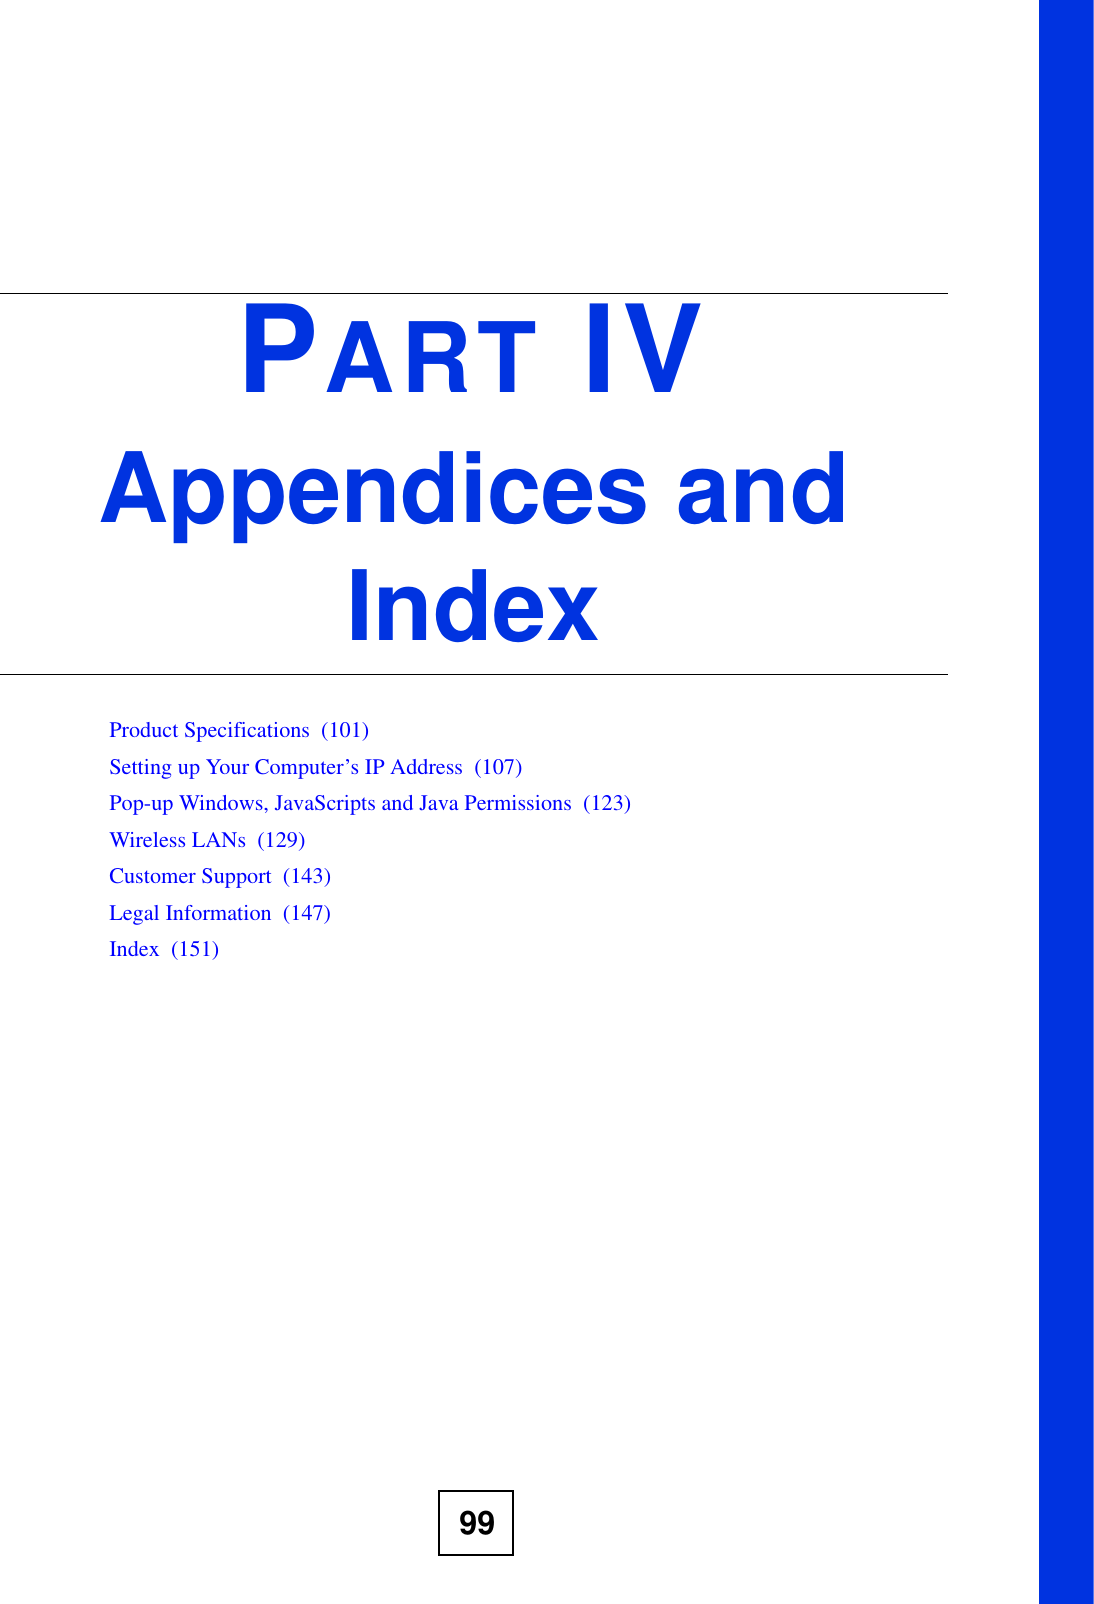 99PART IVAppendices and IndexProduct Specifications  (101)Setting up Your Computer’s IP Address  (107)Pop-up Windows, JavaScripts and Java Permissions  (123)Wireless LANs  (129)Customer Support  (143)Legal Information  (147)Index  (151)